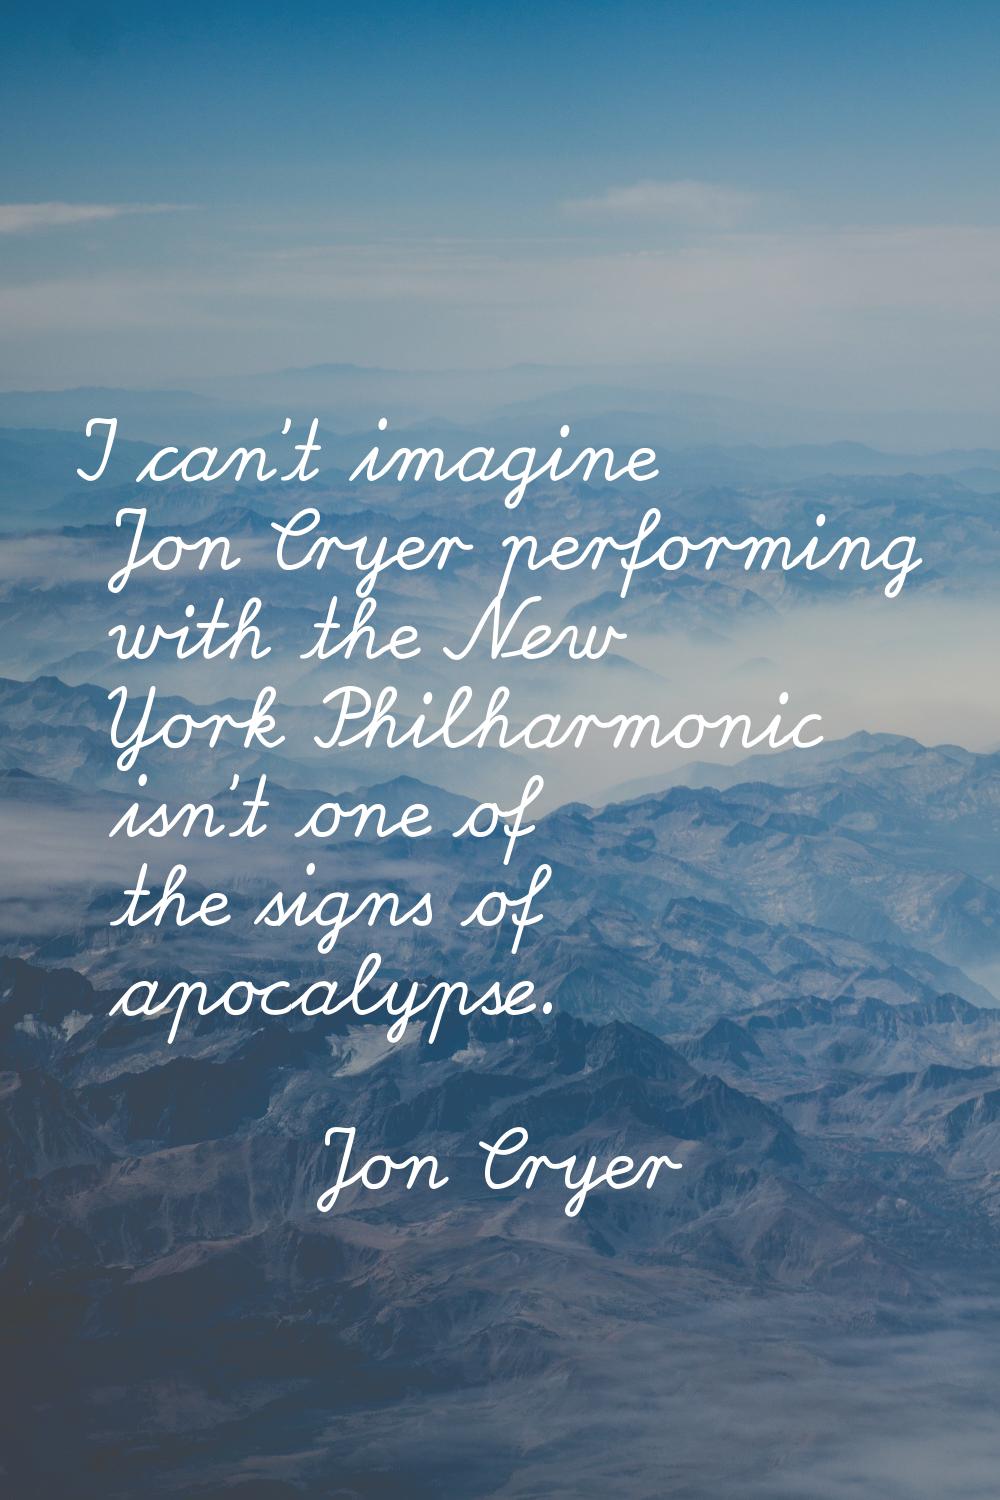 I can't imagine Jon Cryer performing with the New York Philharmonic isn't one of the signs of apoca